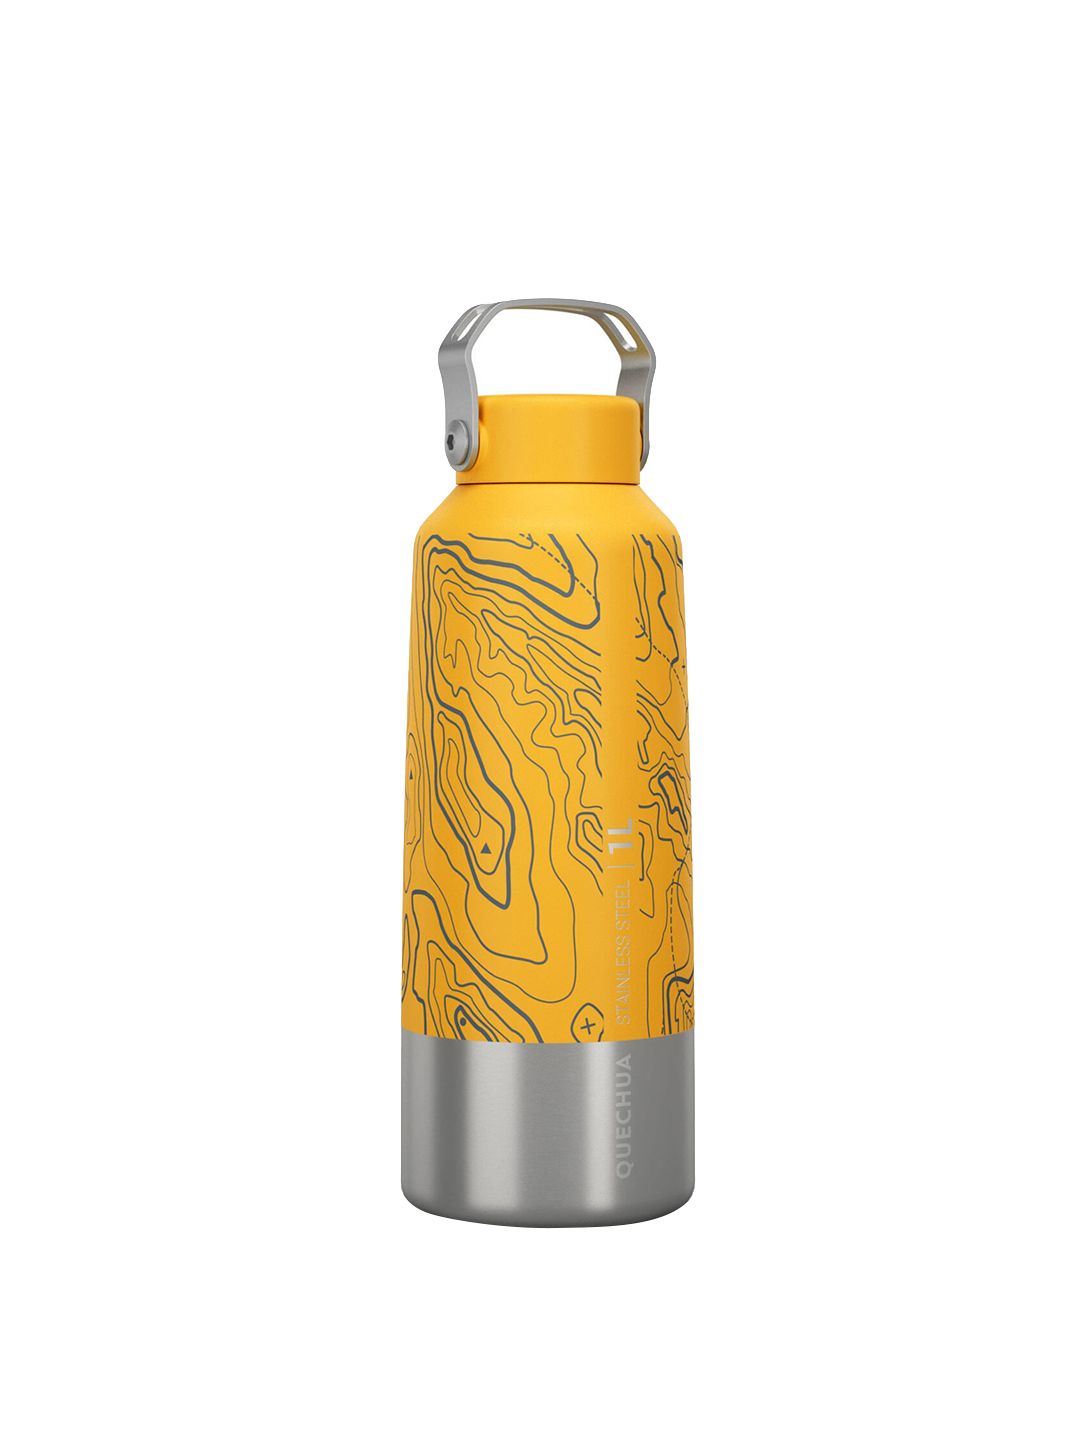 Quechua By Decathlon Yellow Limited Edition Hiking Water Bottle 1L MH100 Price in India